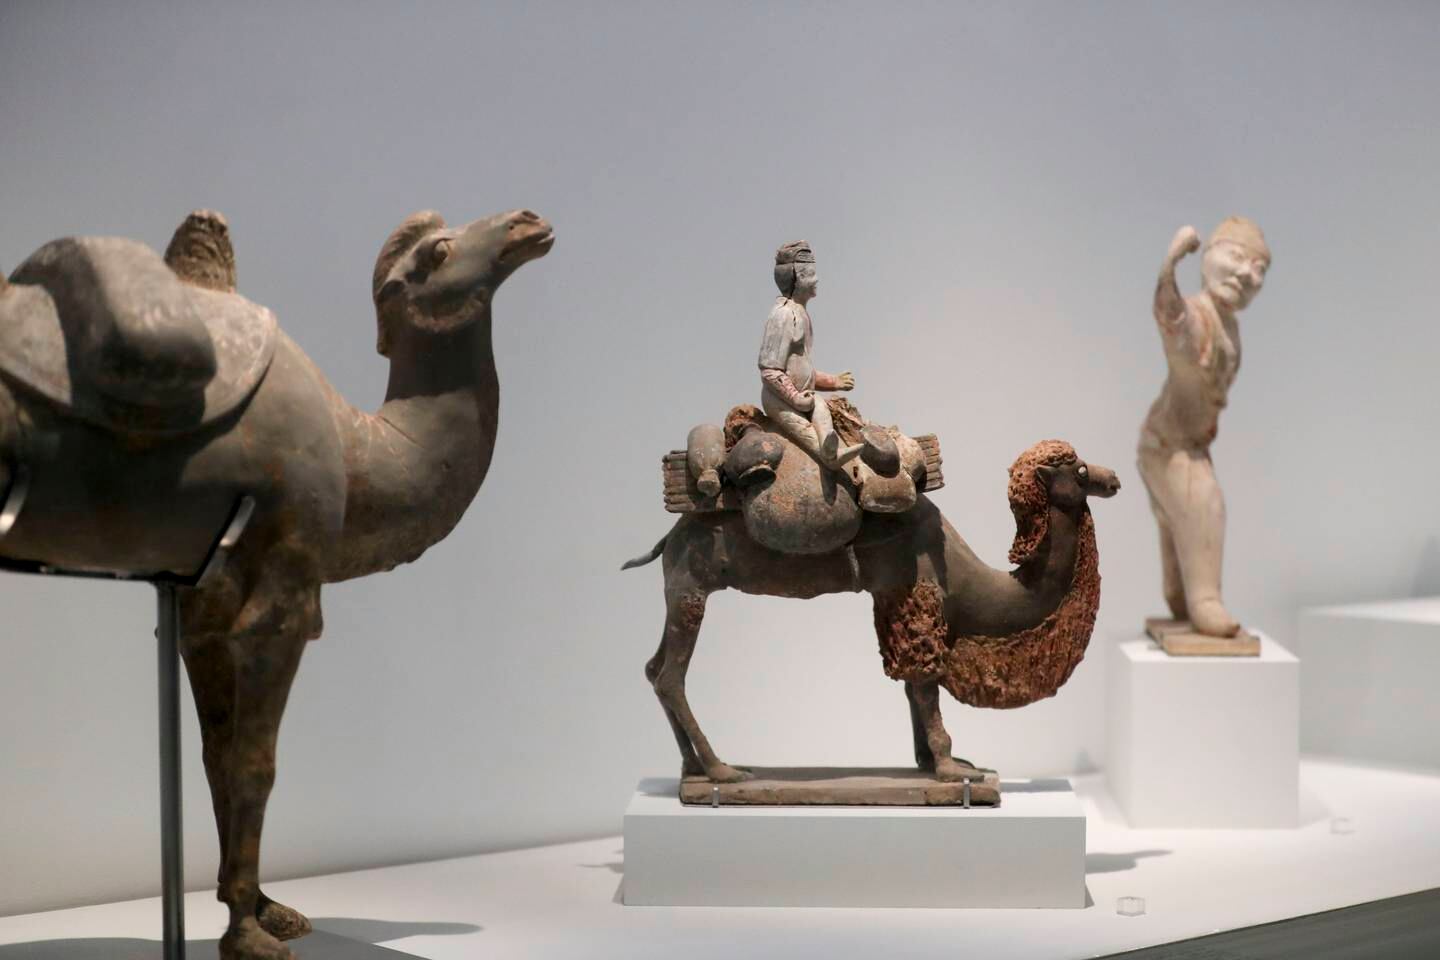 Funerary figure of a caravaner on a camel from Northern China. Khushnum Bhandari / The National
